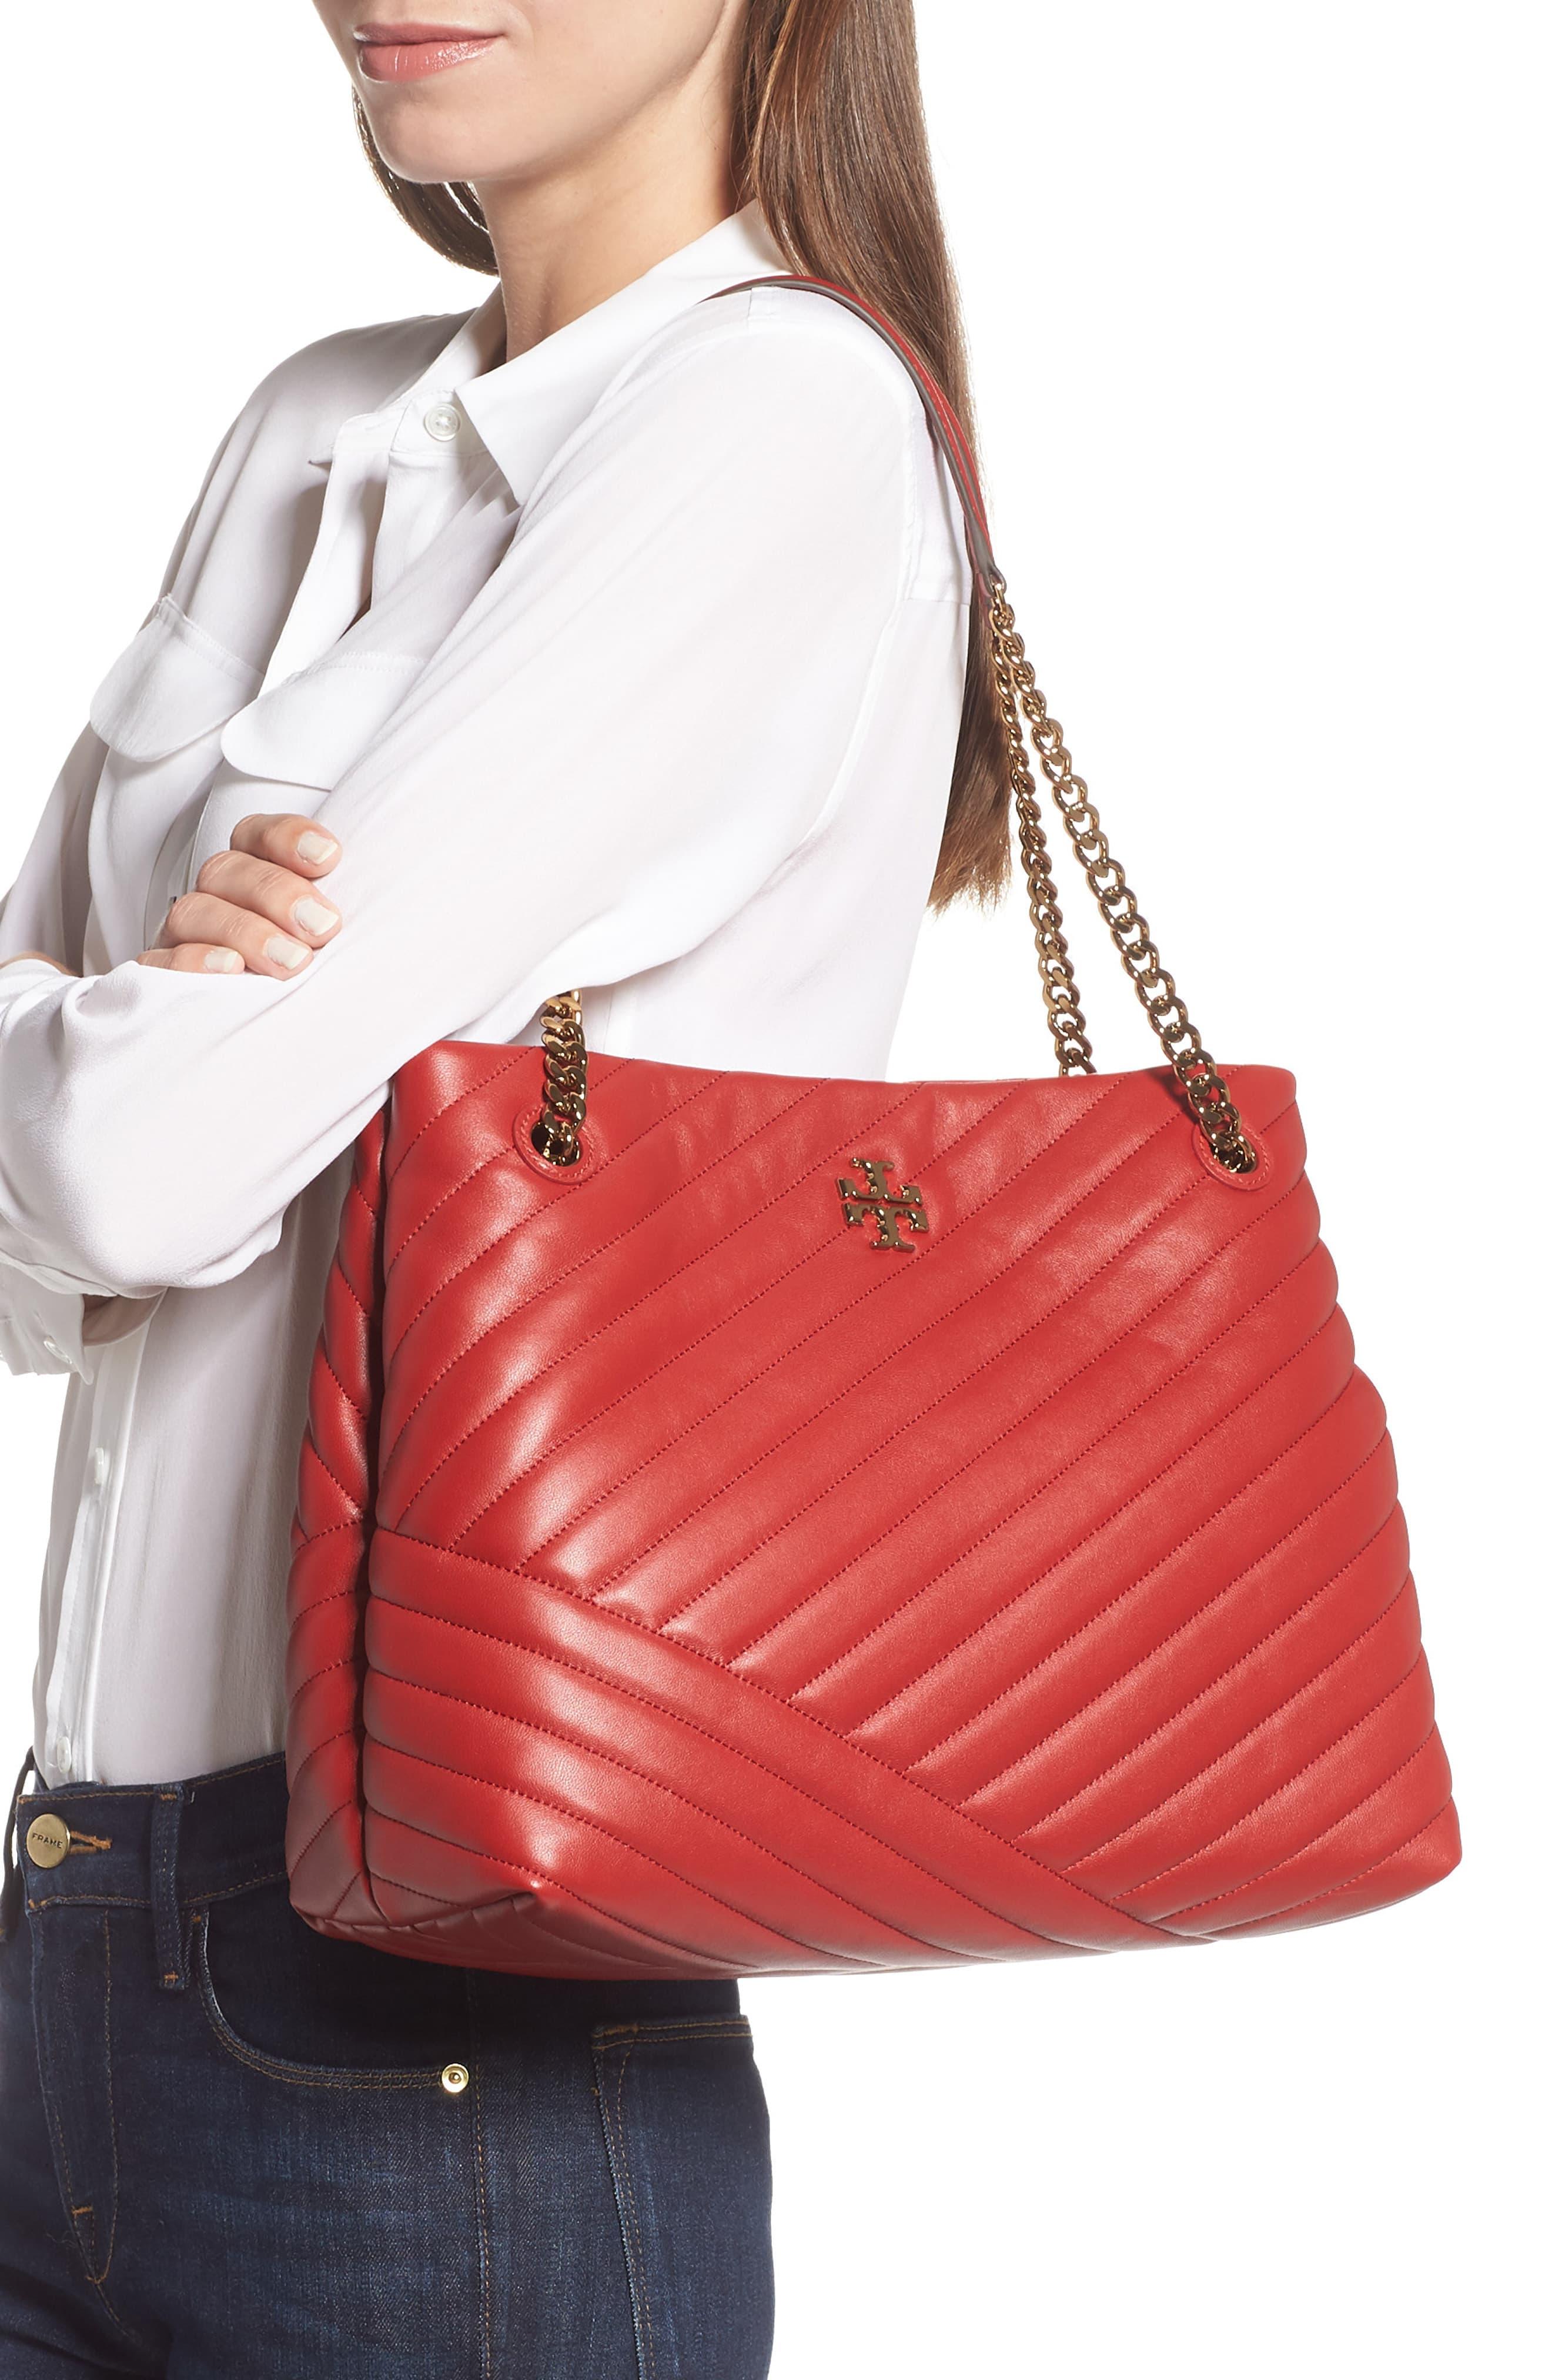 Tory Burch Leather Kira Chevron Tote Bag in Red - Lyst